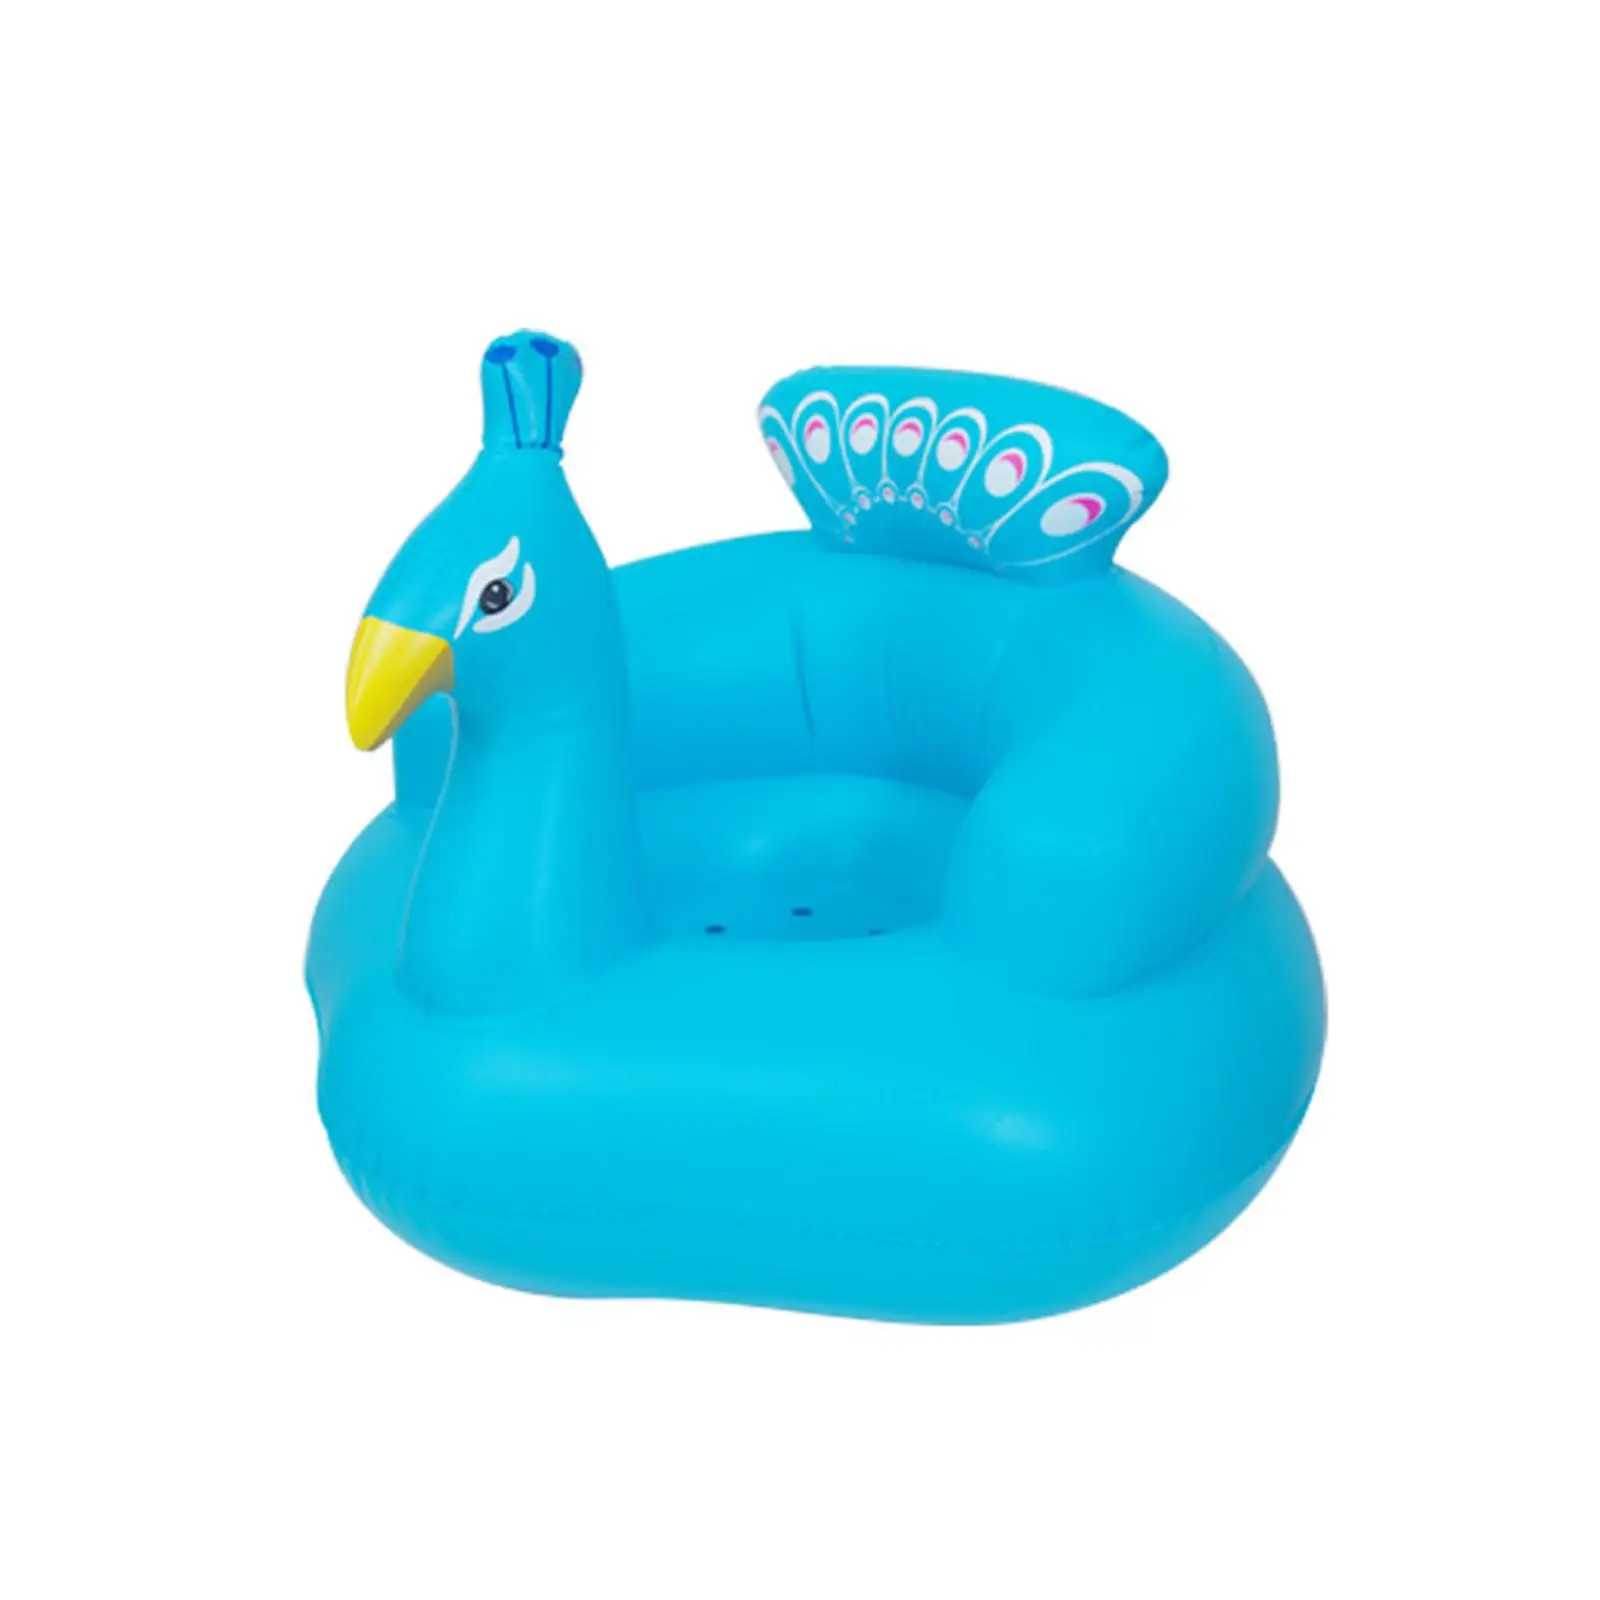 Baby Inflatable Seat Toddler Chair for Sitting up Baby Shower Chair Floor Seater Floor Seat 3 Months and up baby Seat